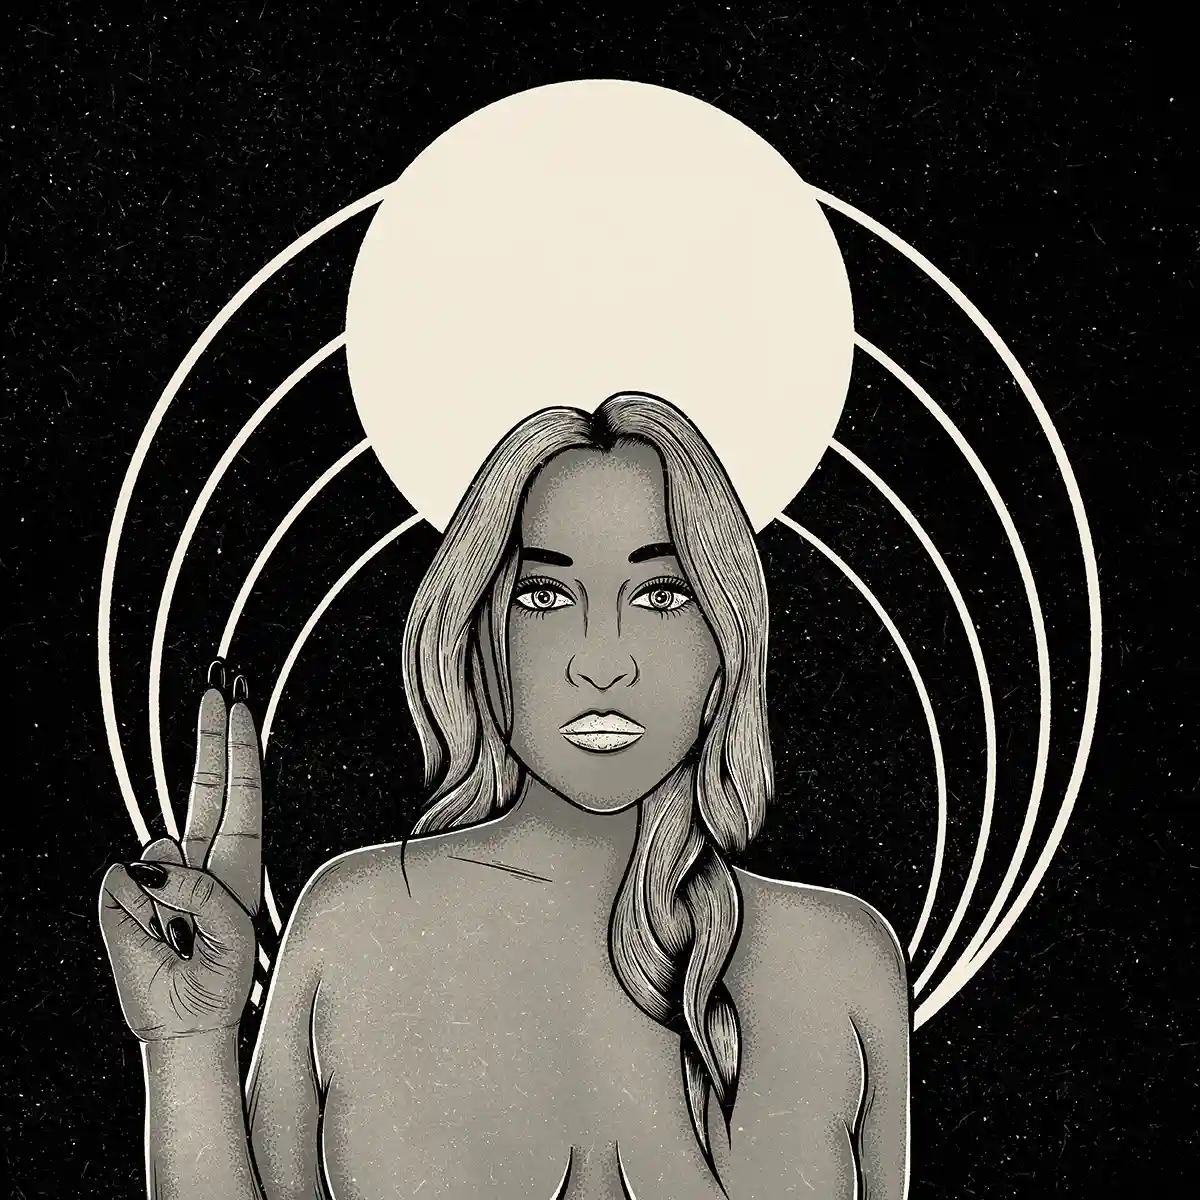 Illustration of a naked woman with her right arm raised in front of a tarot-like sun